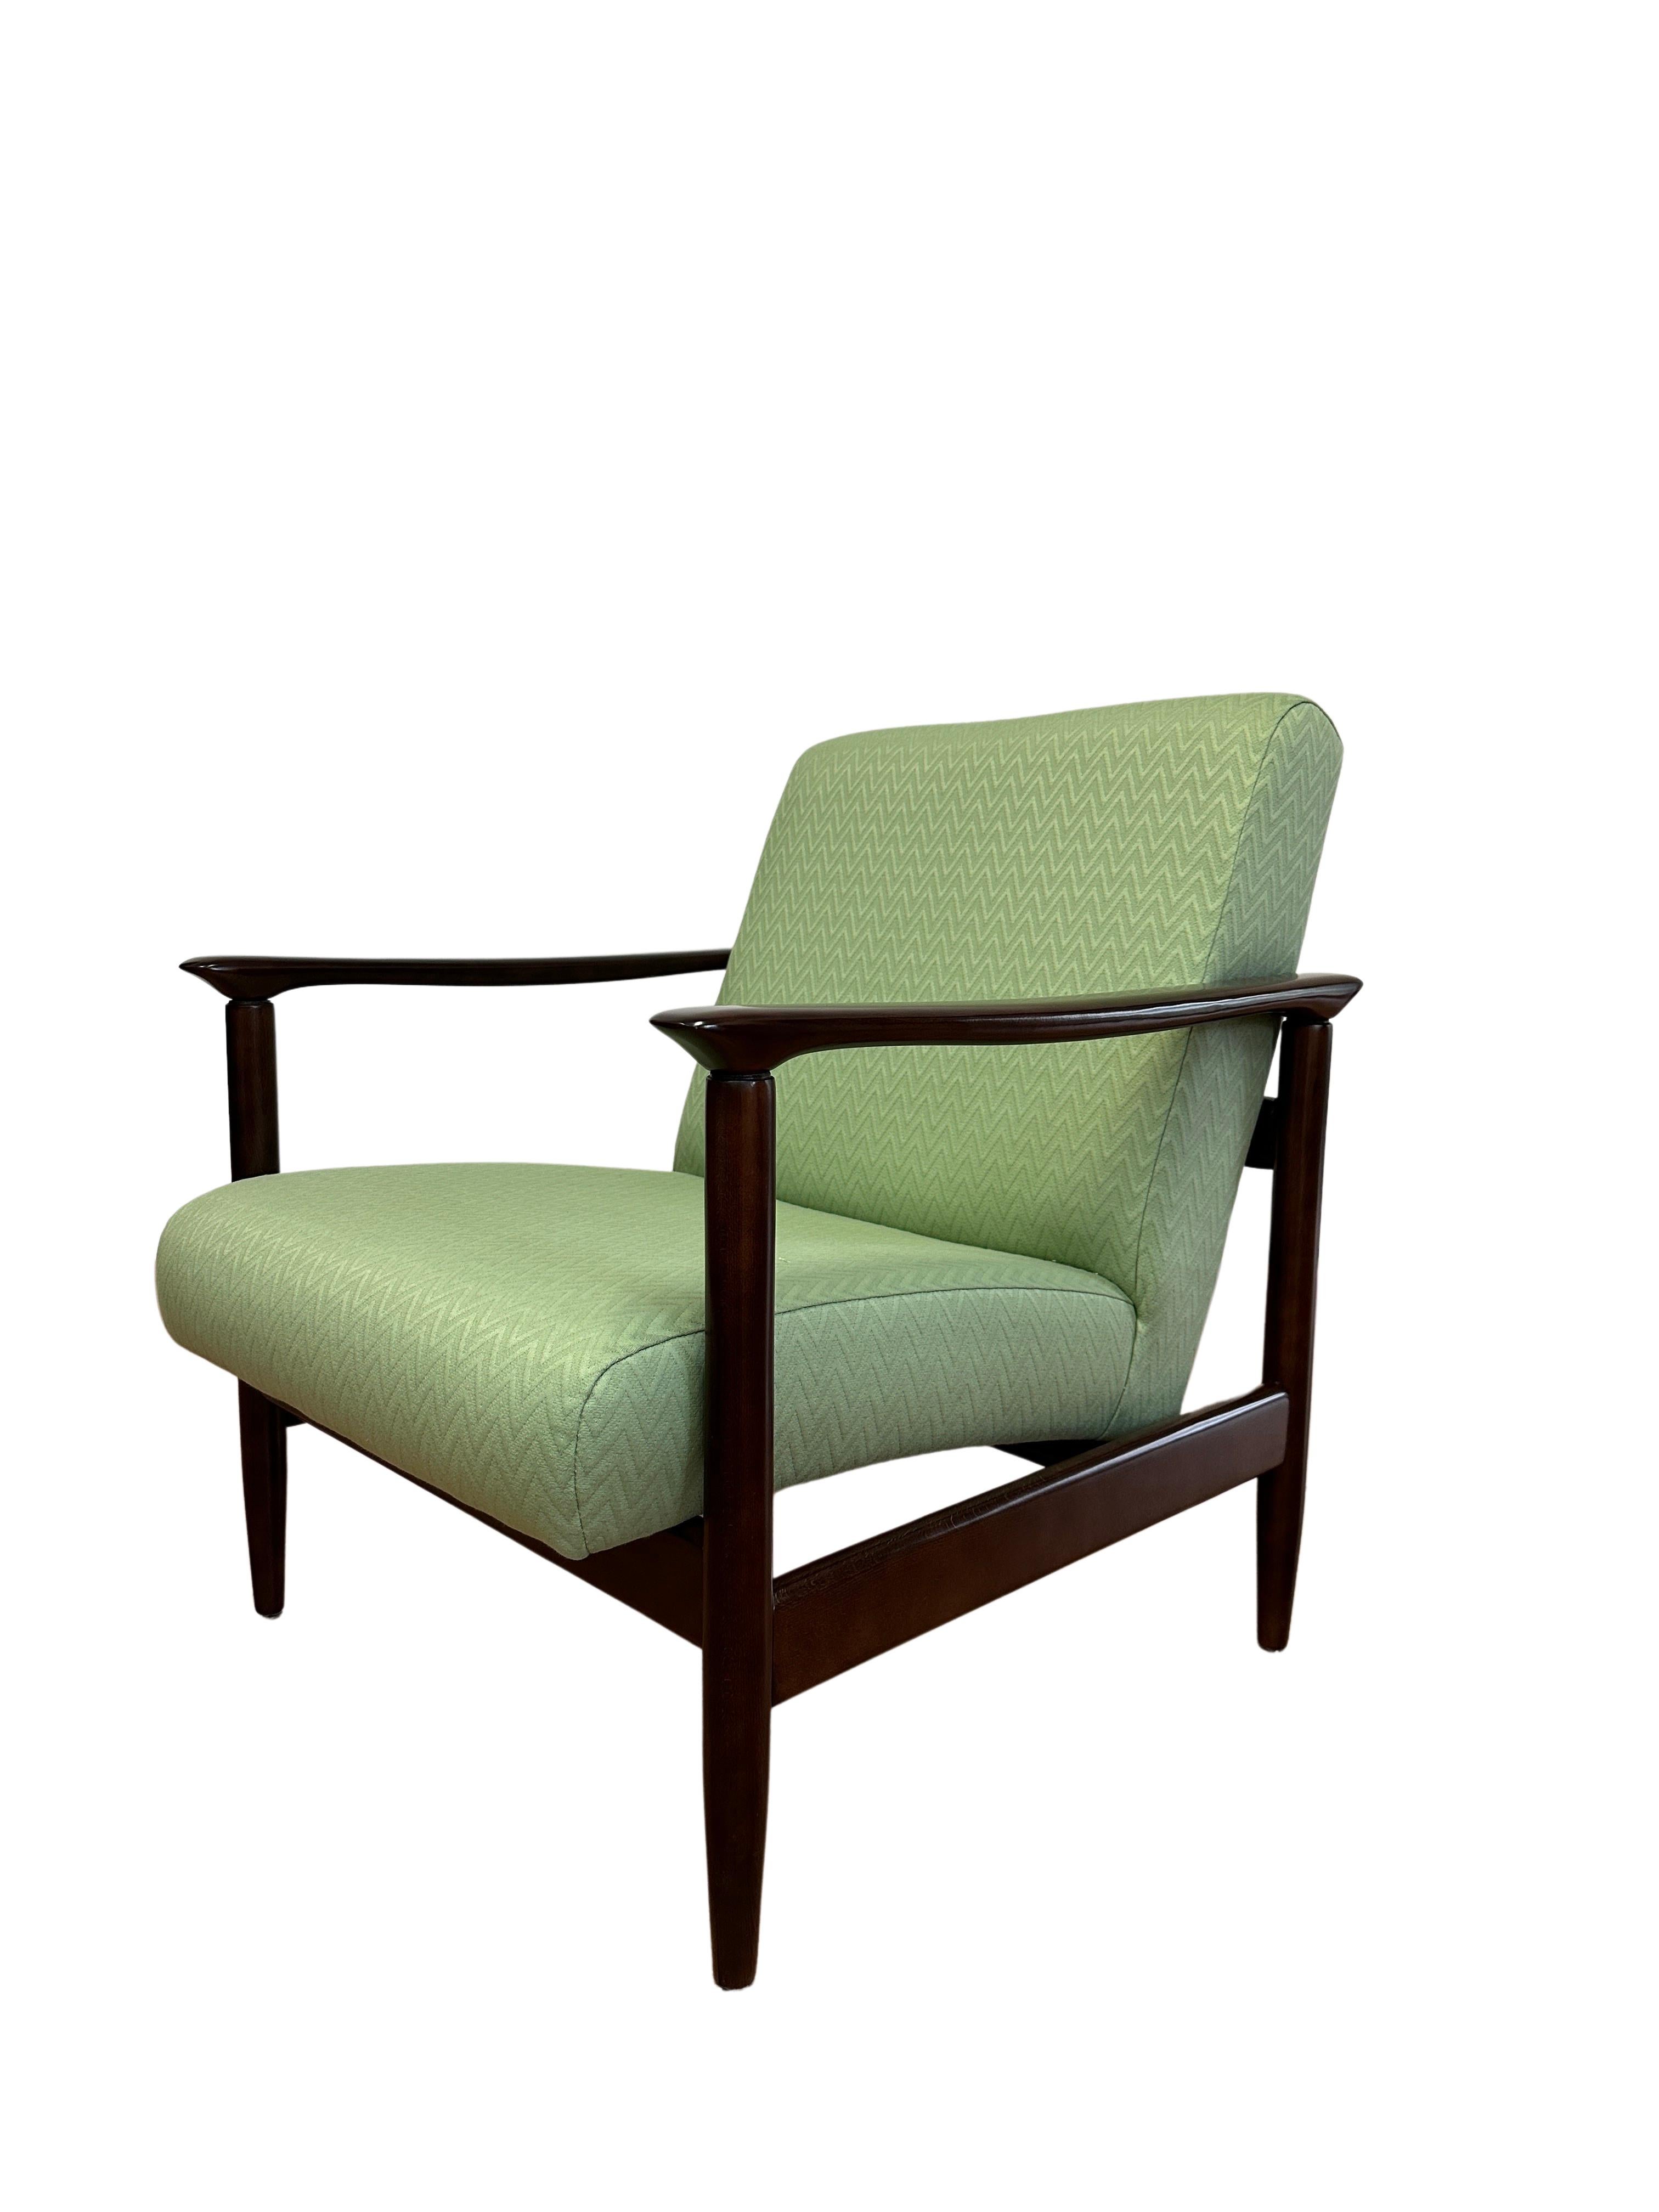 Polish Mid Century Armchair in Green Missoni Upholstery, by Edmund Homa, 1960s For Sale